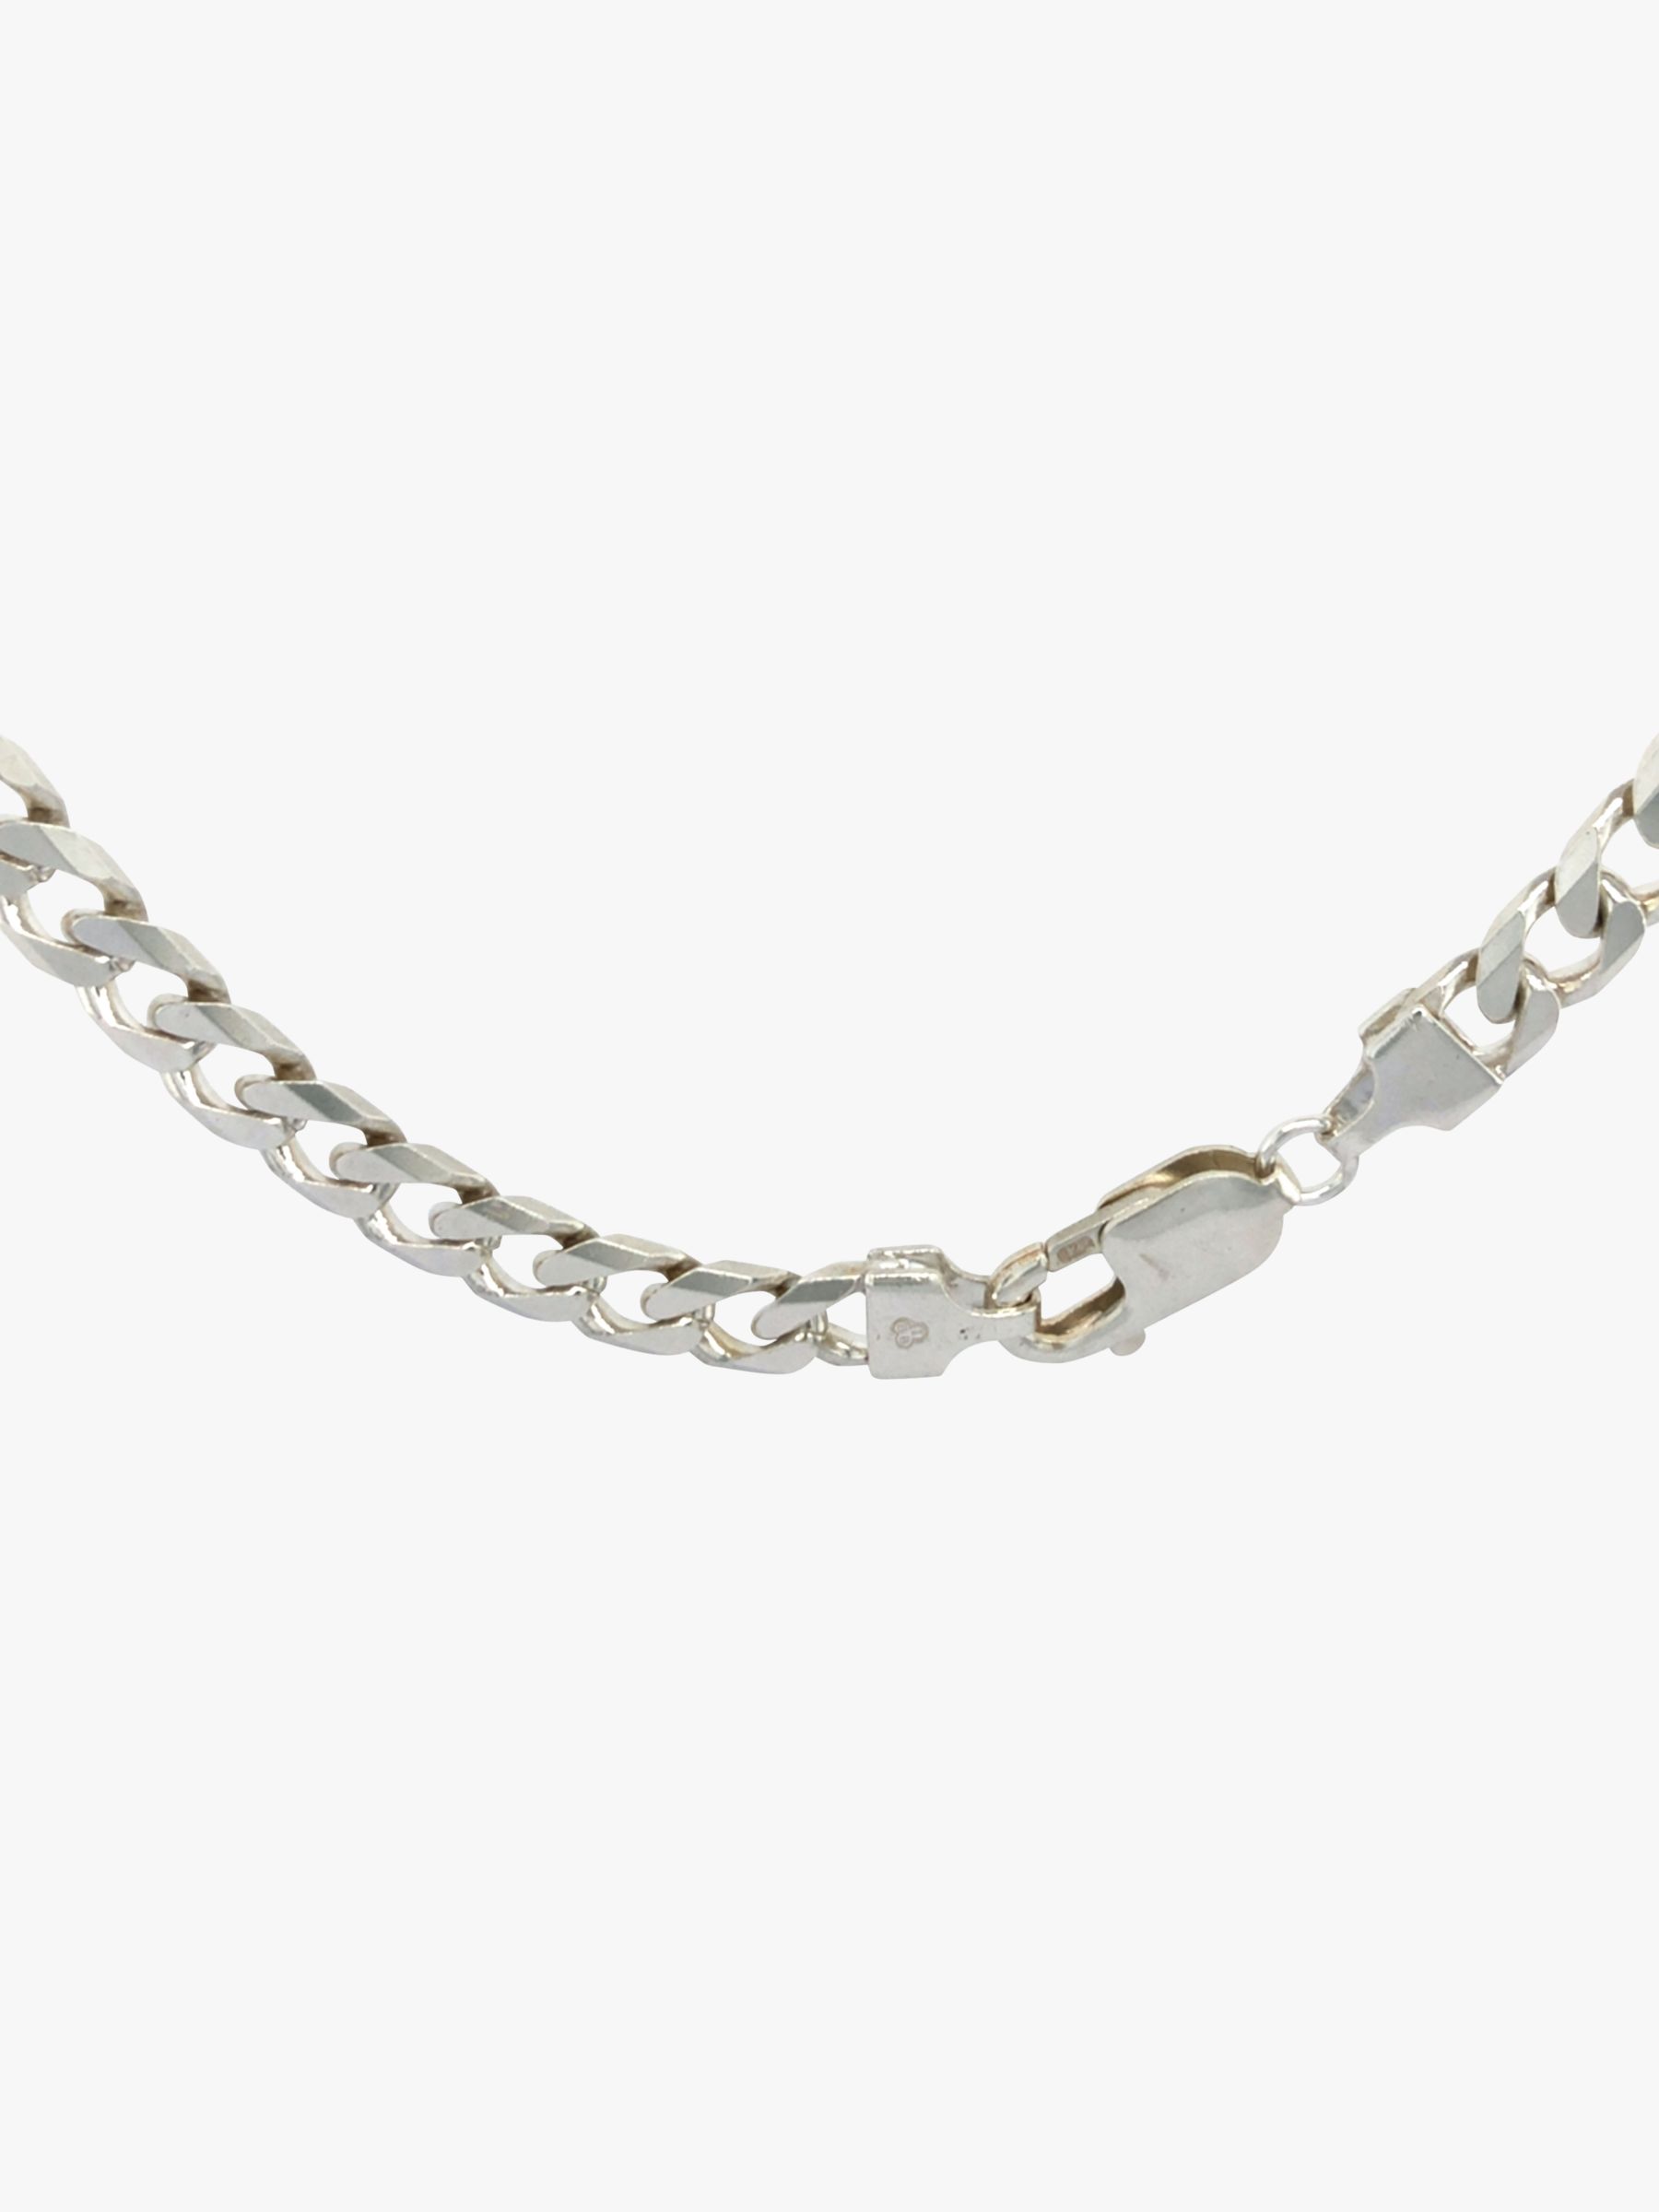 Buy Vintage Fine Jewellery Second Hand Flat Curb Chain Necklace, Dated Circa 1980s Online at johnlewis.com